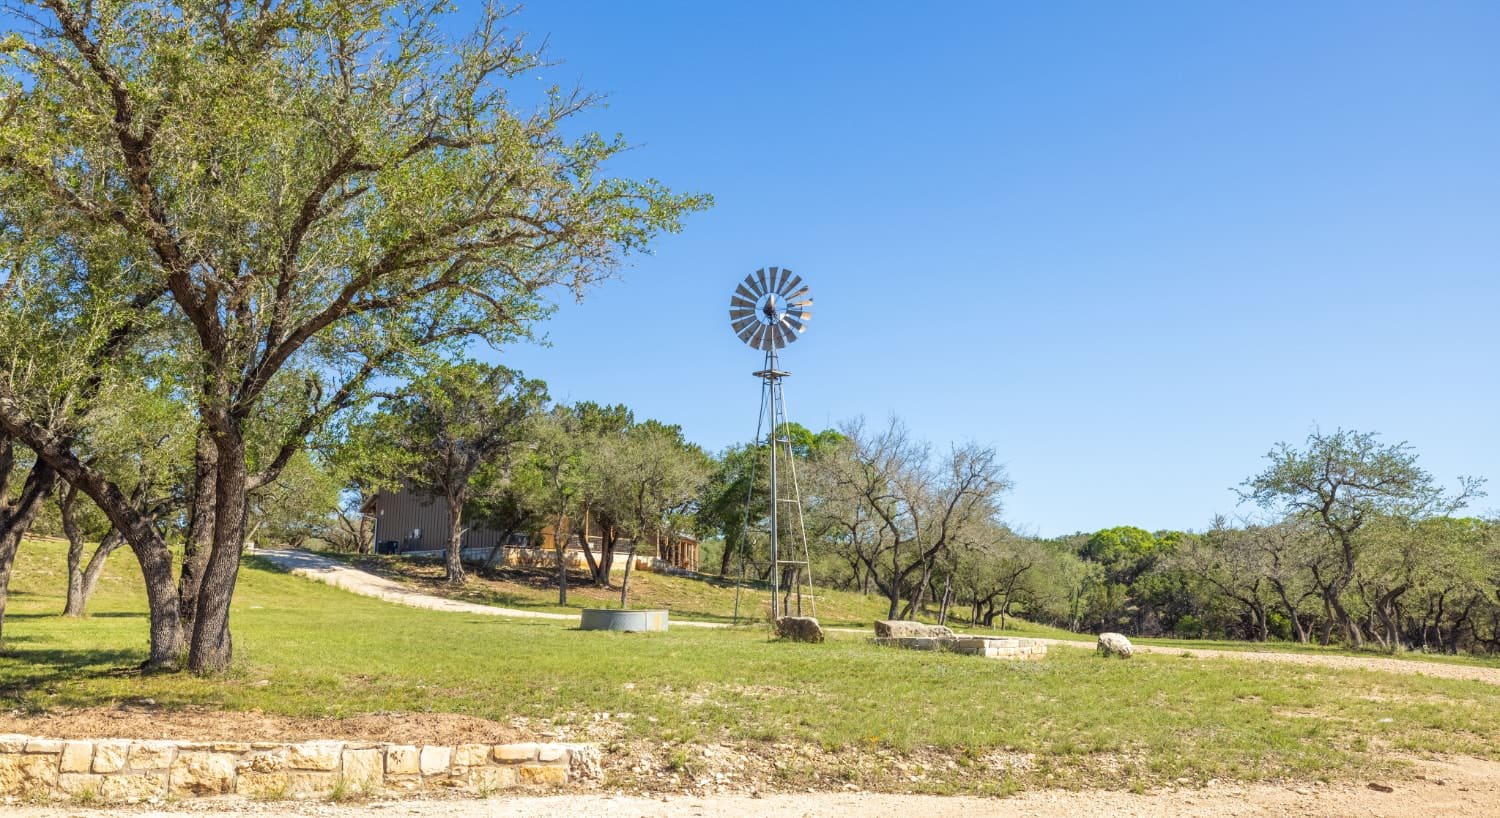 Large grassy area with green trees, windmill, property, and large green trees in the background